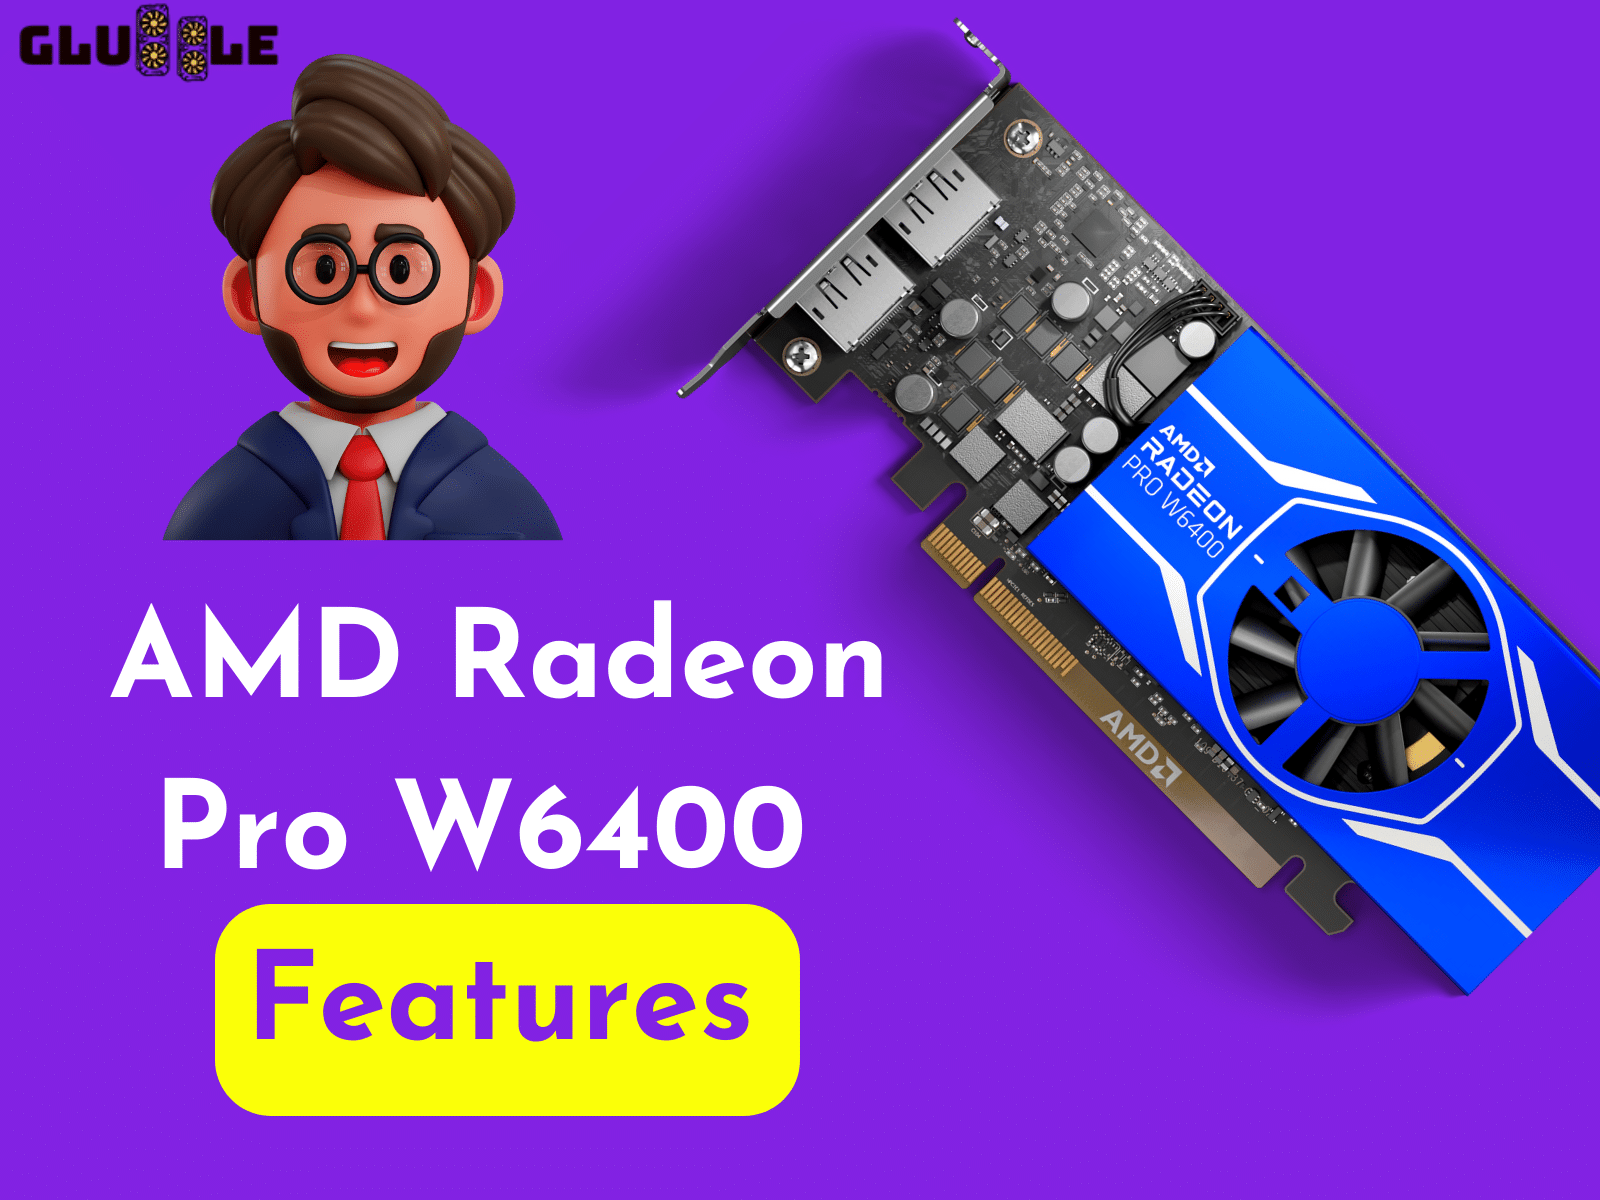 C:\Users\Mohsin\Downloads\AMD Radeon Pro W6400 Features.png